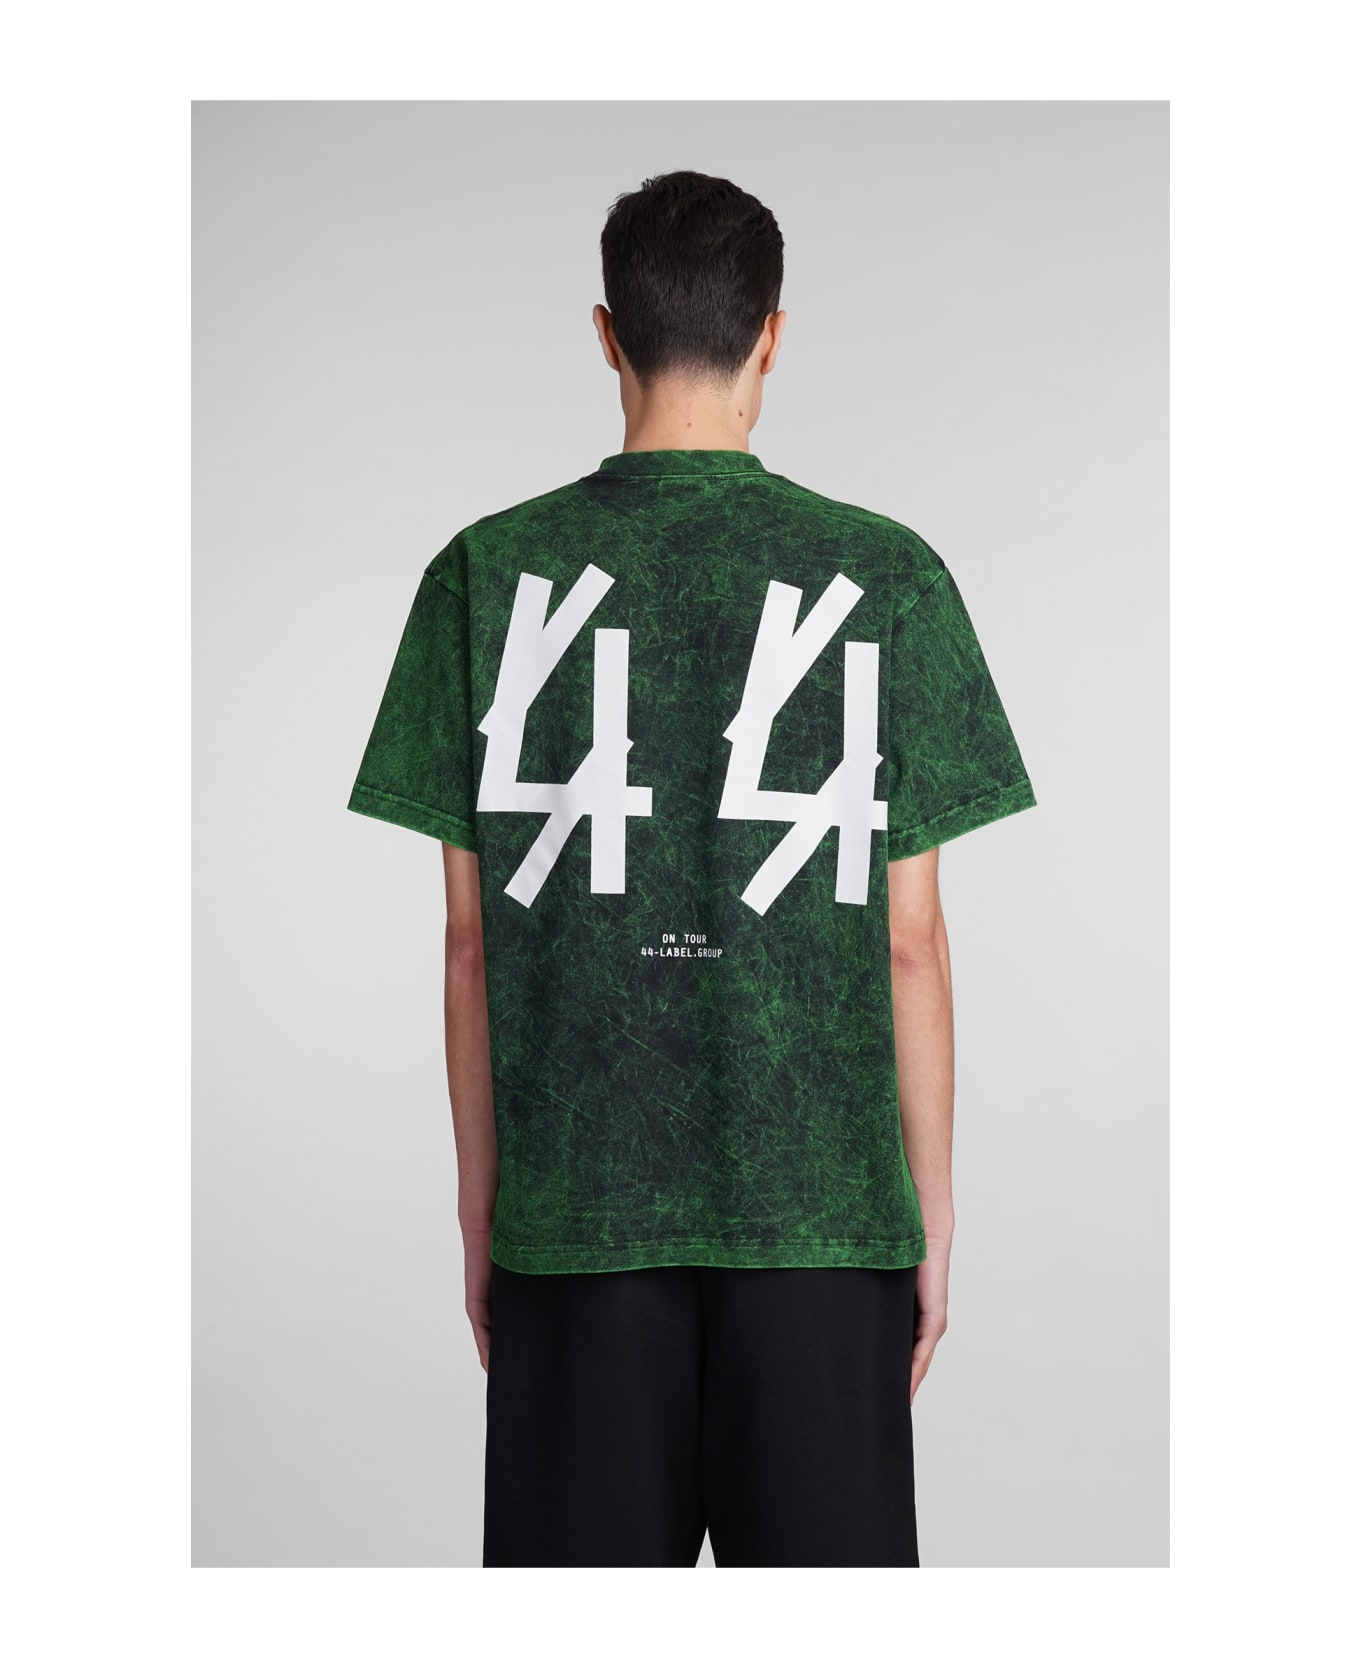 44 Label Group T-shirt In Green Cotton - Blk+sol.green + 44 solid